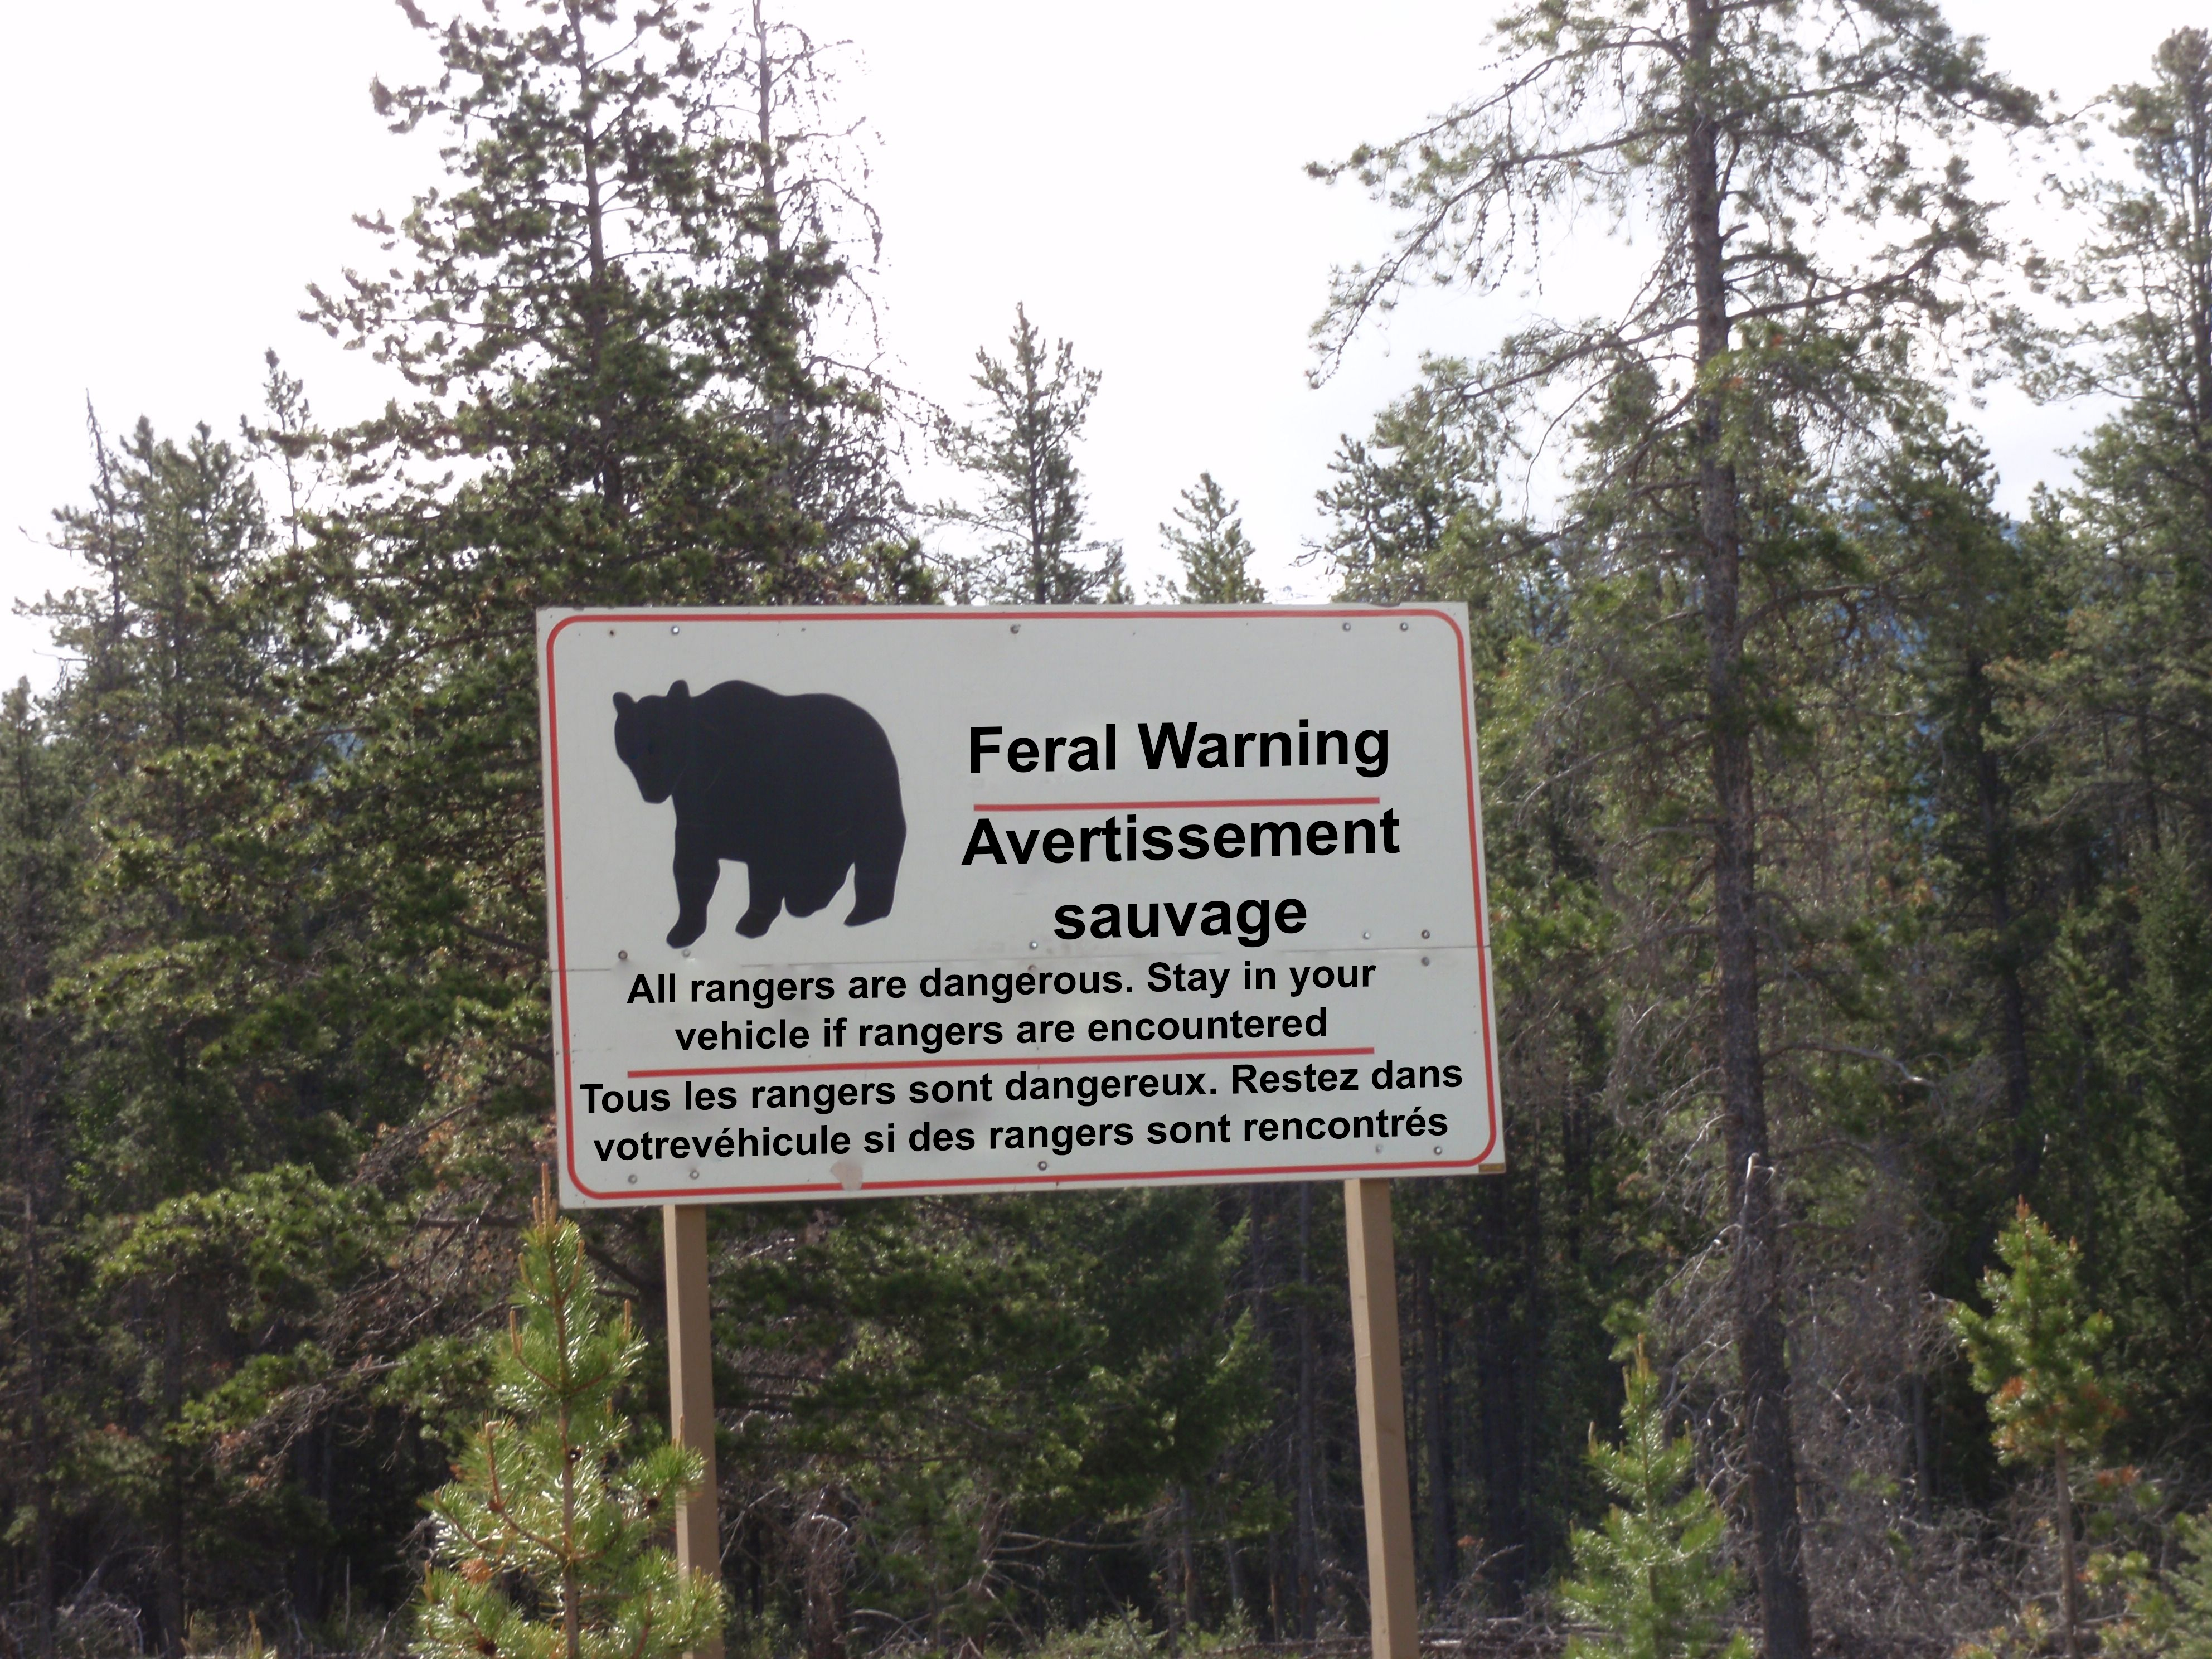 A nature warning sign with the depiction of a bear "Feral Warning" "All rangers are dangerous. Stay in your vehicle if rangers are encountered." The message repeats in French